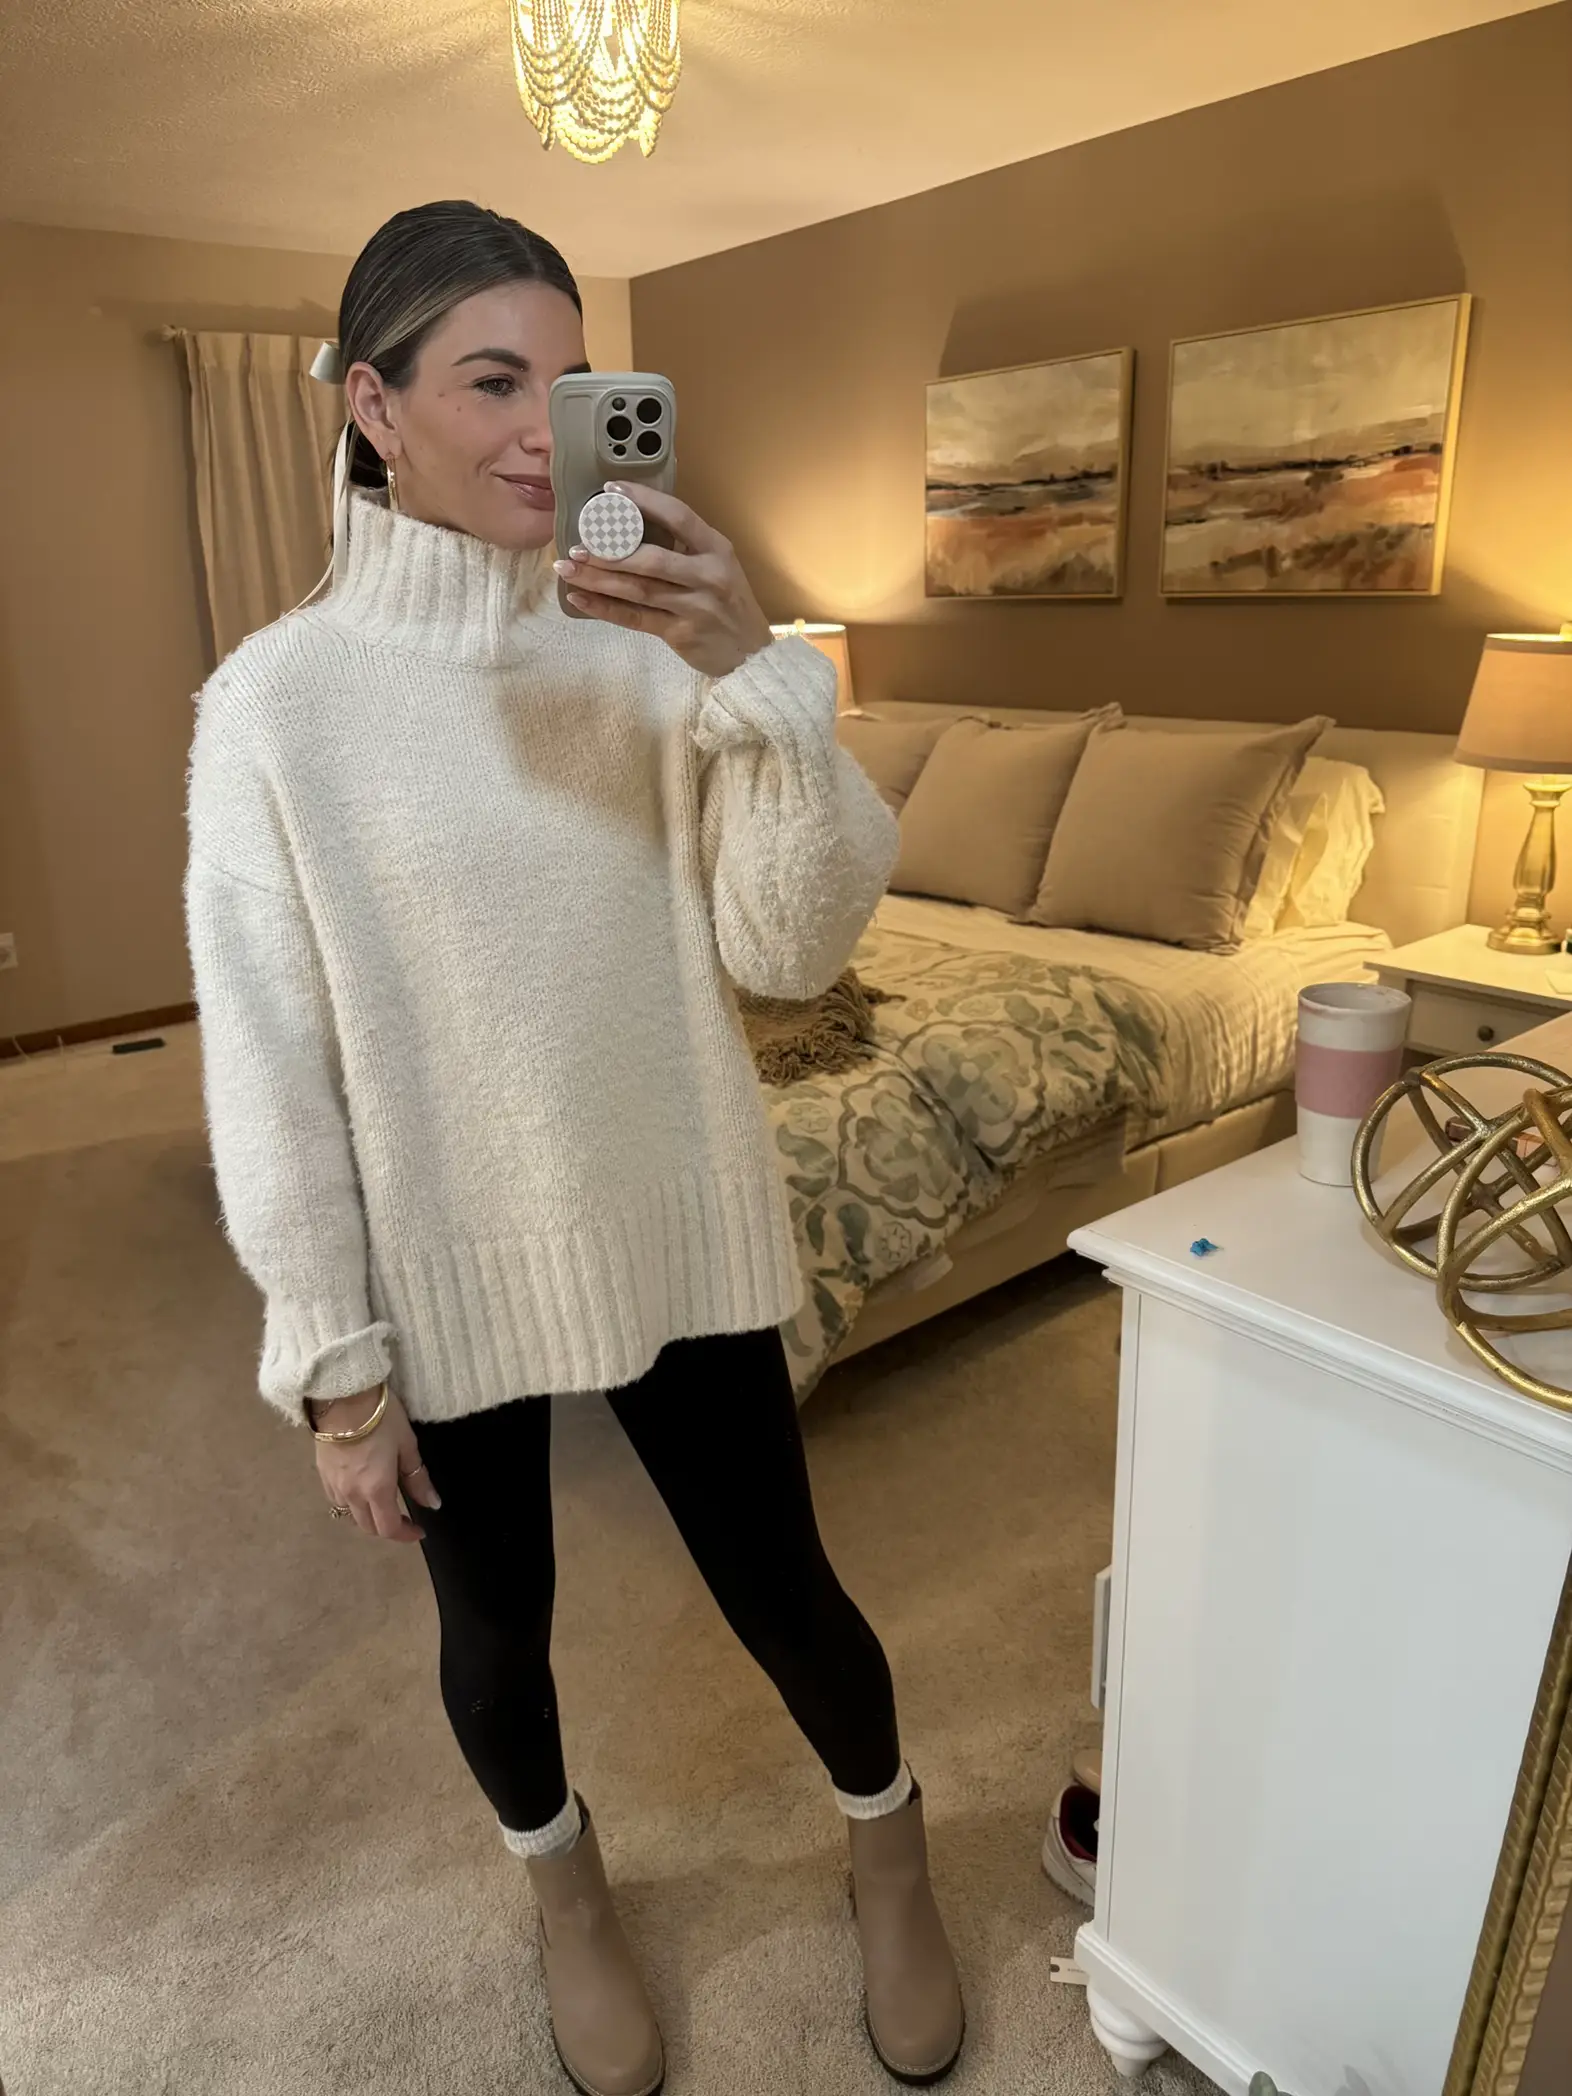 20 top how to style a sweatshirt and still look stylish ideas in 2024